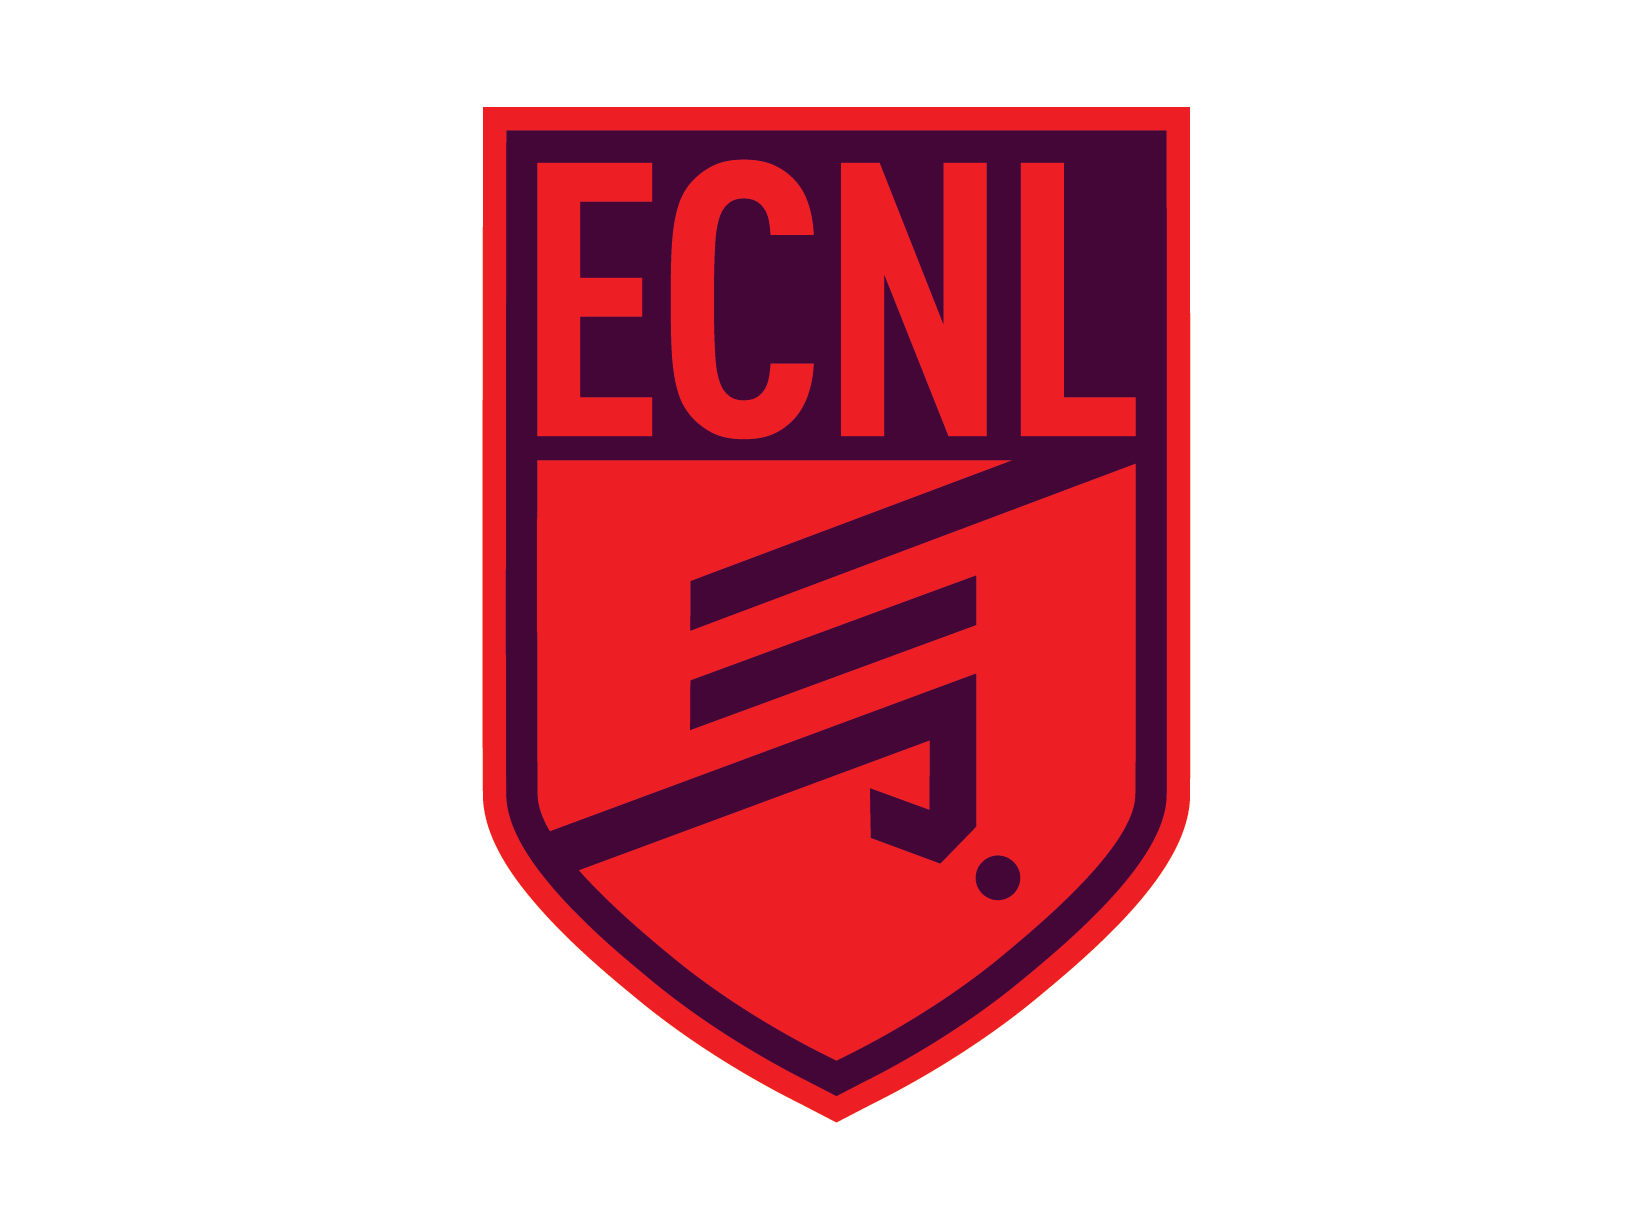 ECNL_Girls_Primary_Badge with White_Outline